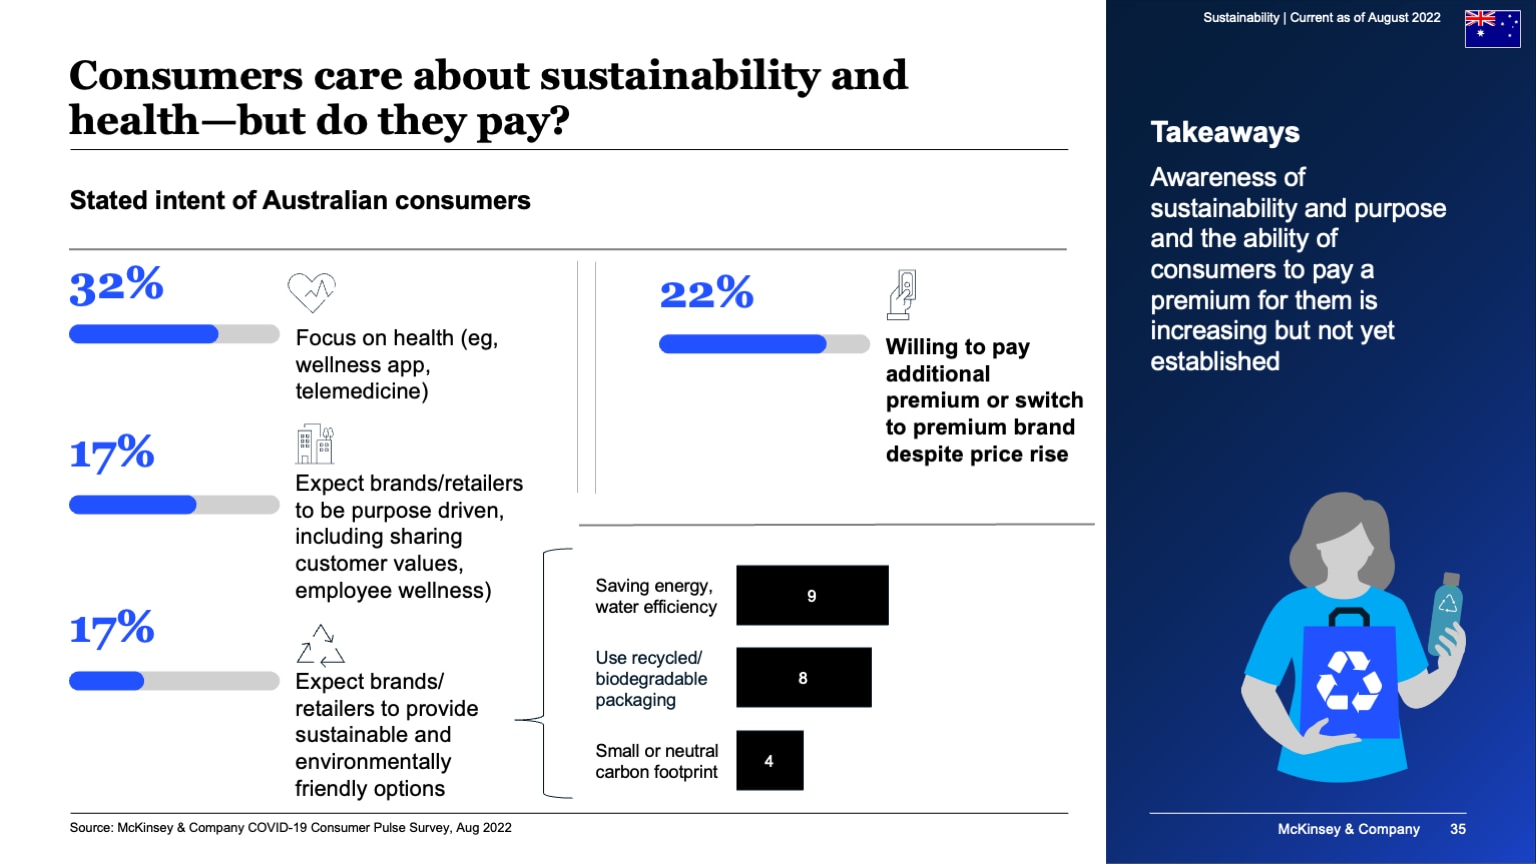 Consumers care about sustainability and health--but do they pay?